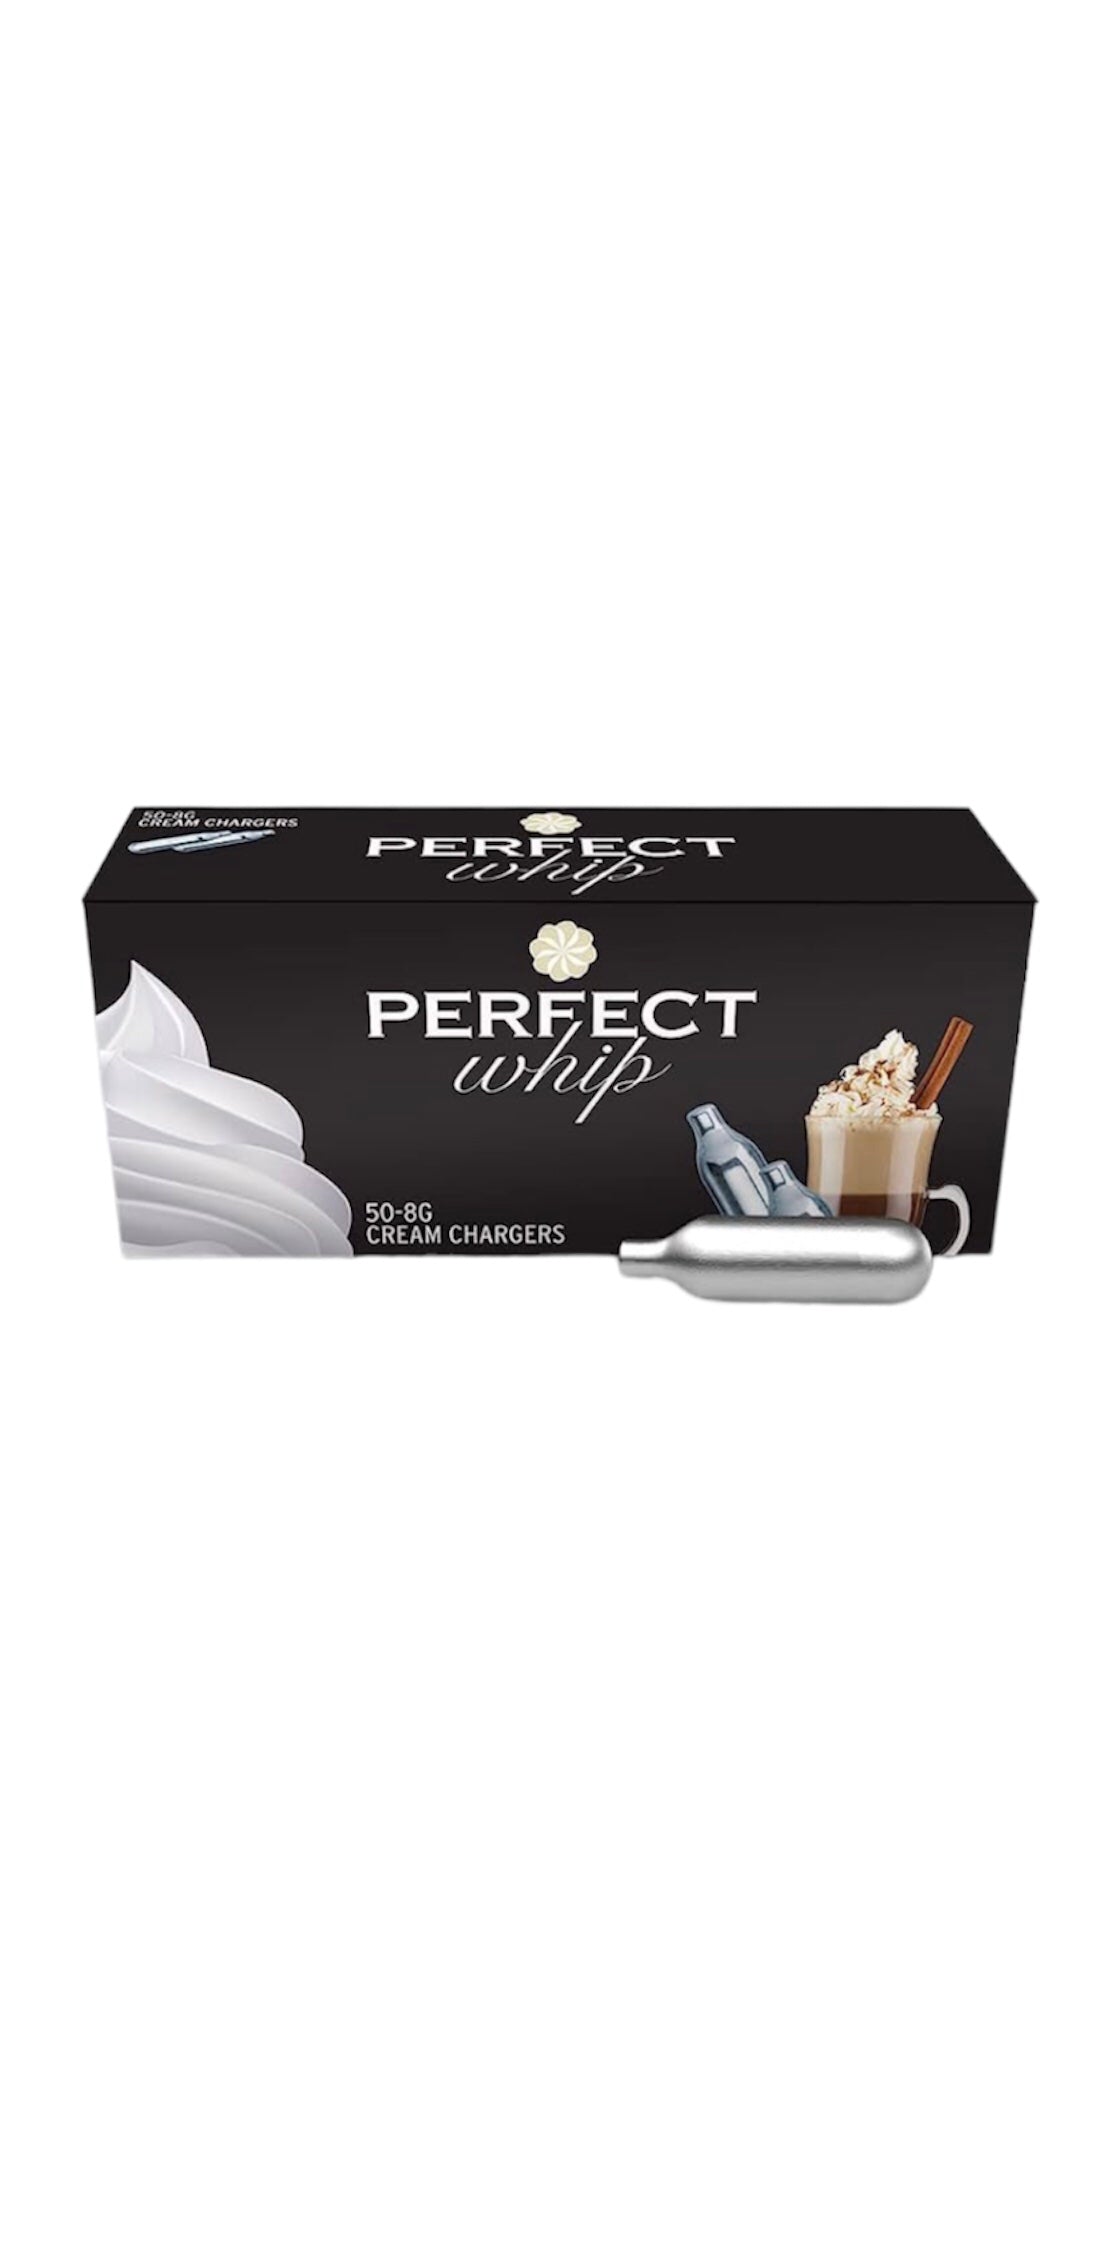 PERFECT WHIP CREAM 8G CHARGERS | 50PK